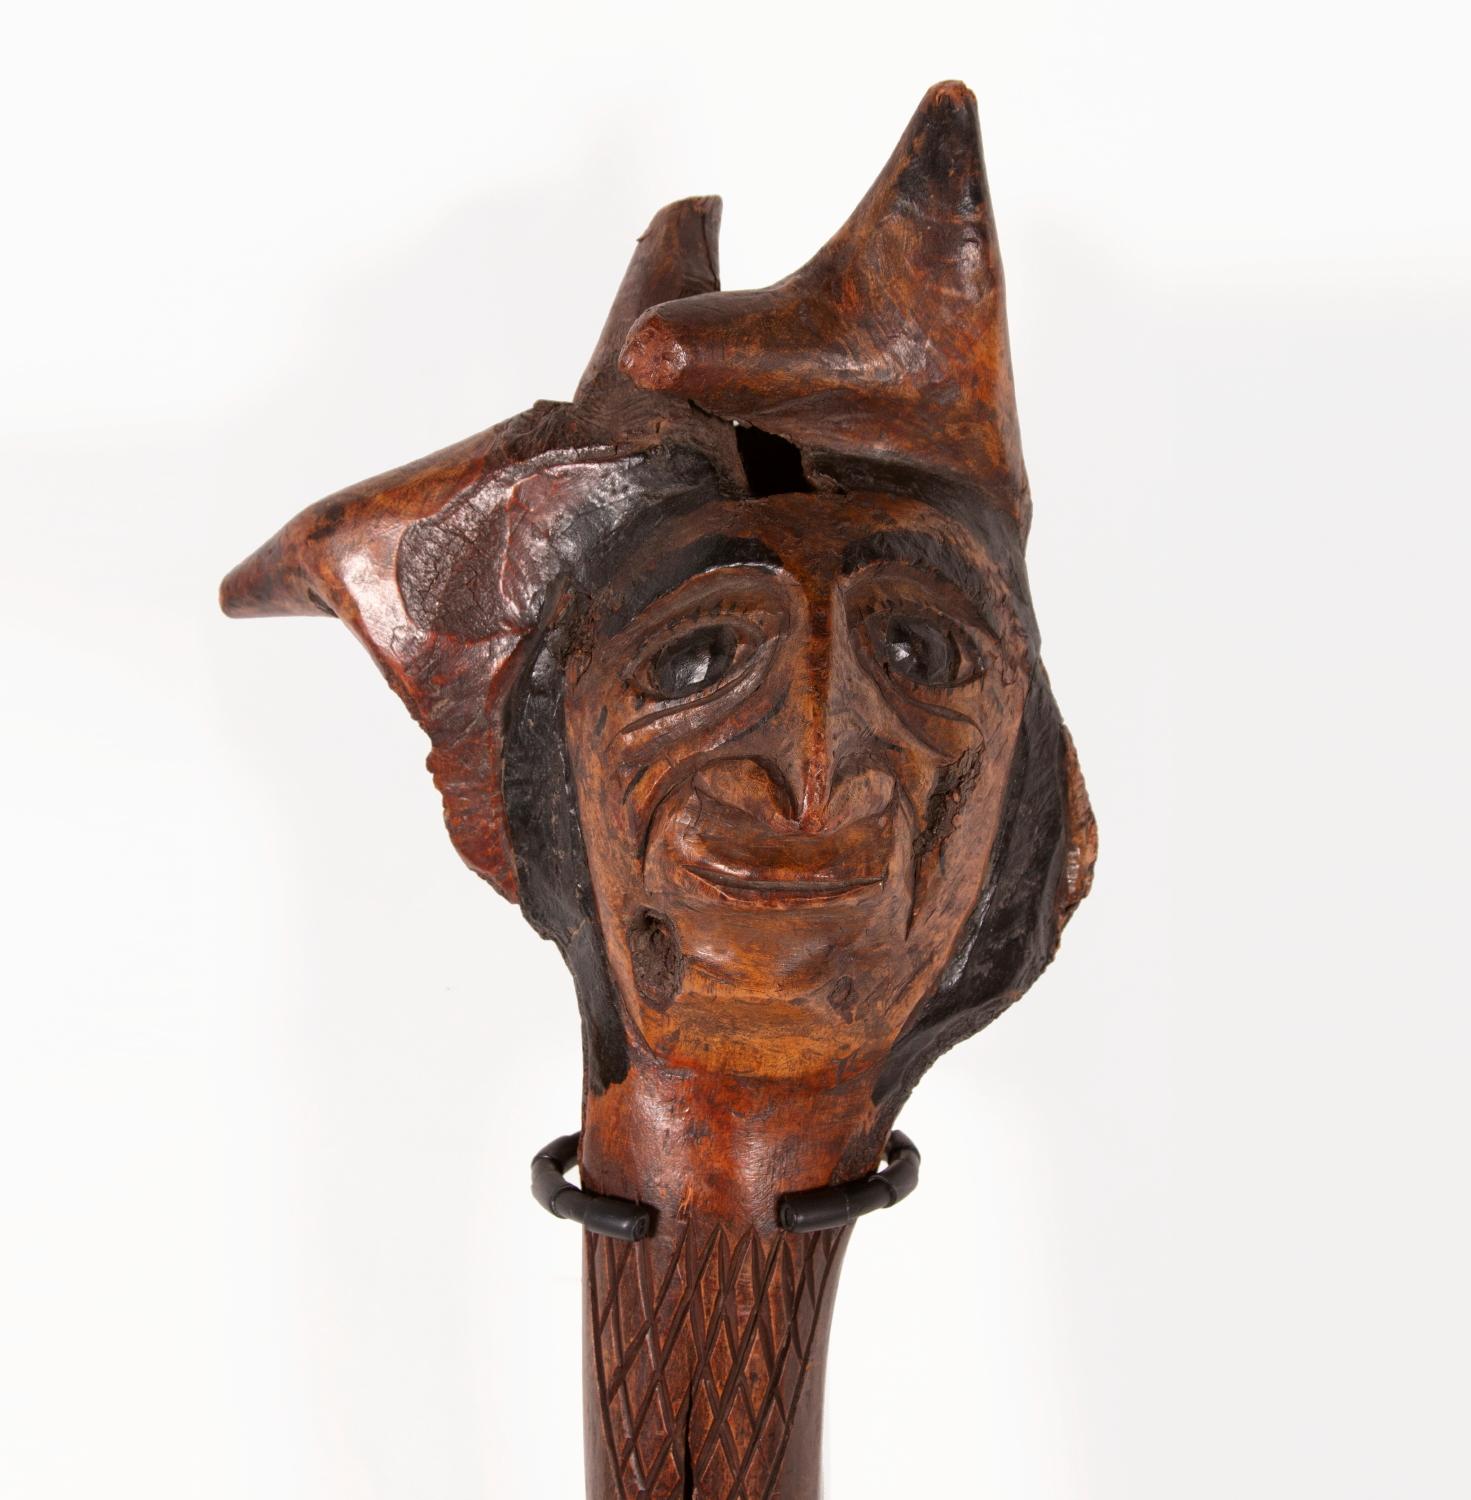 NATIVE AMERICAN, PENOBSCOT ROOT CLUB WITH GREAT CHARACTER AND PATINA, ca 1870-1890's

Carved from small birch trees, uprooted and turned on end, root clubs were a tradition of the Maine Indian Penobscot and Passamaquoddy tribes. Originally carried